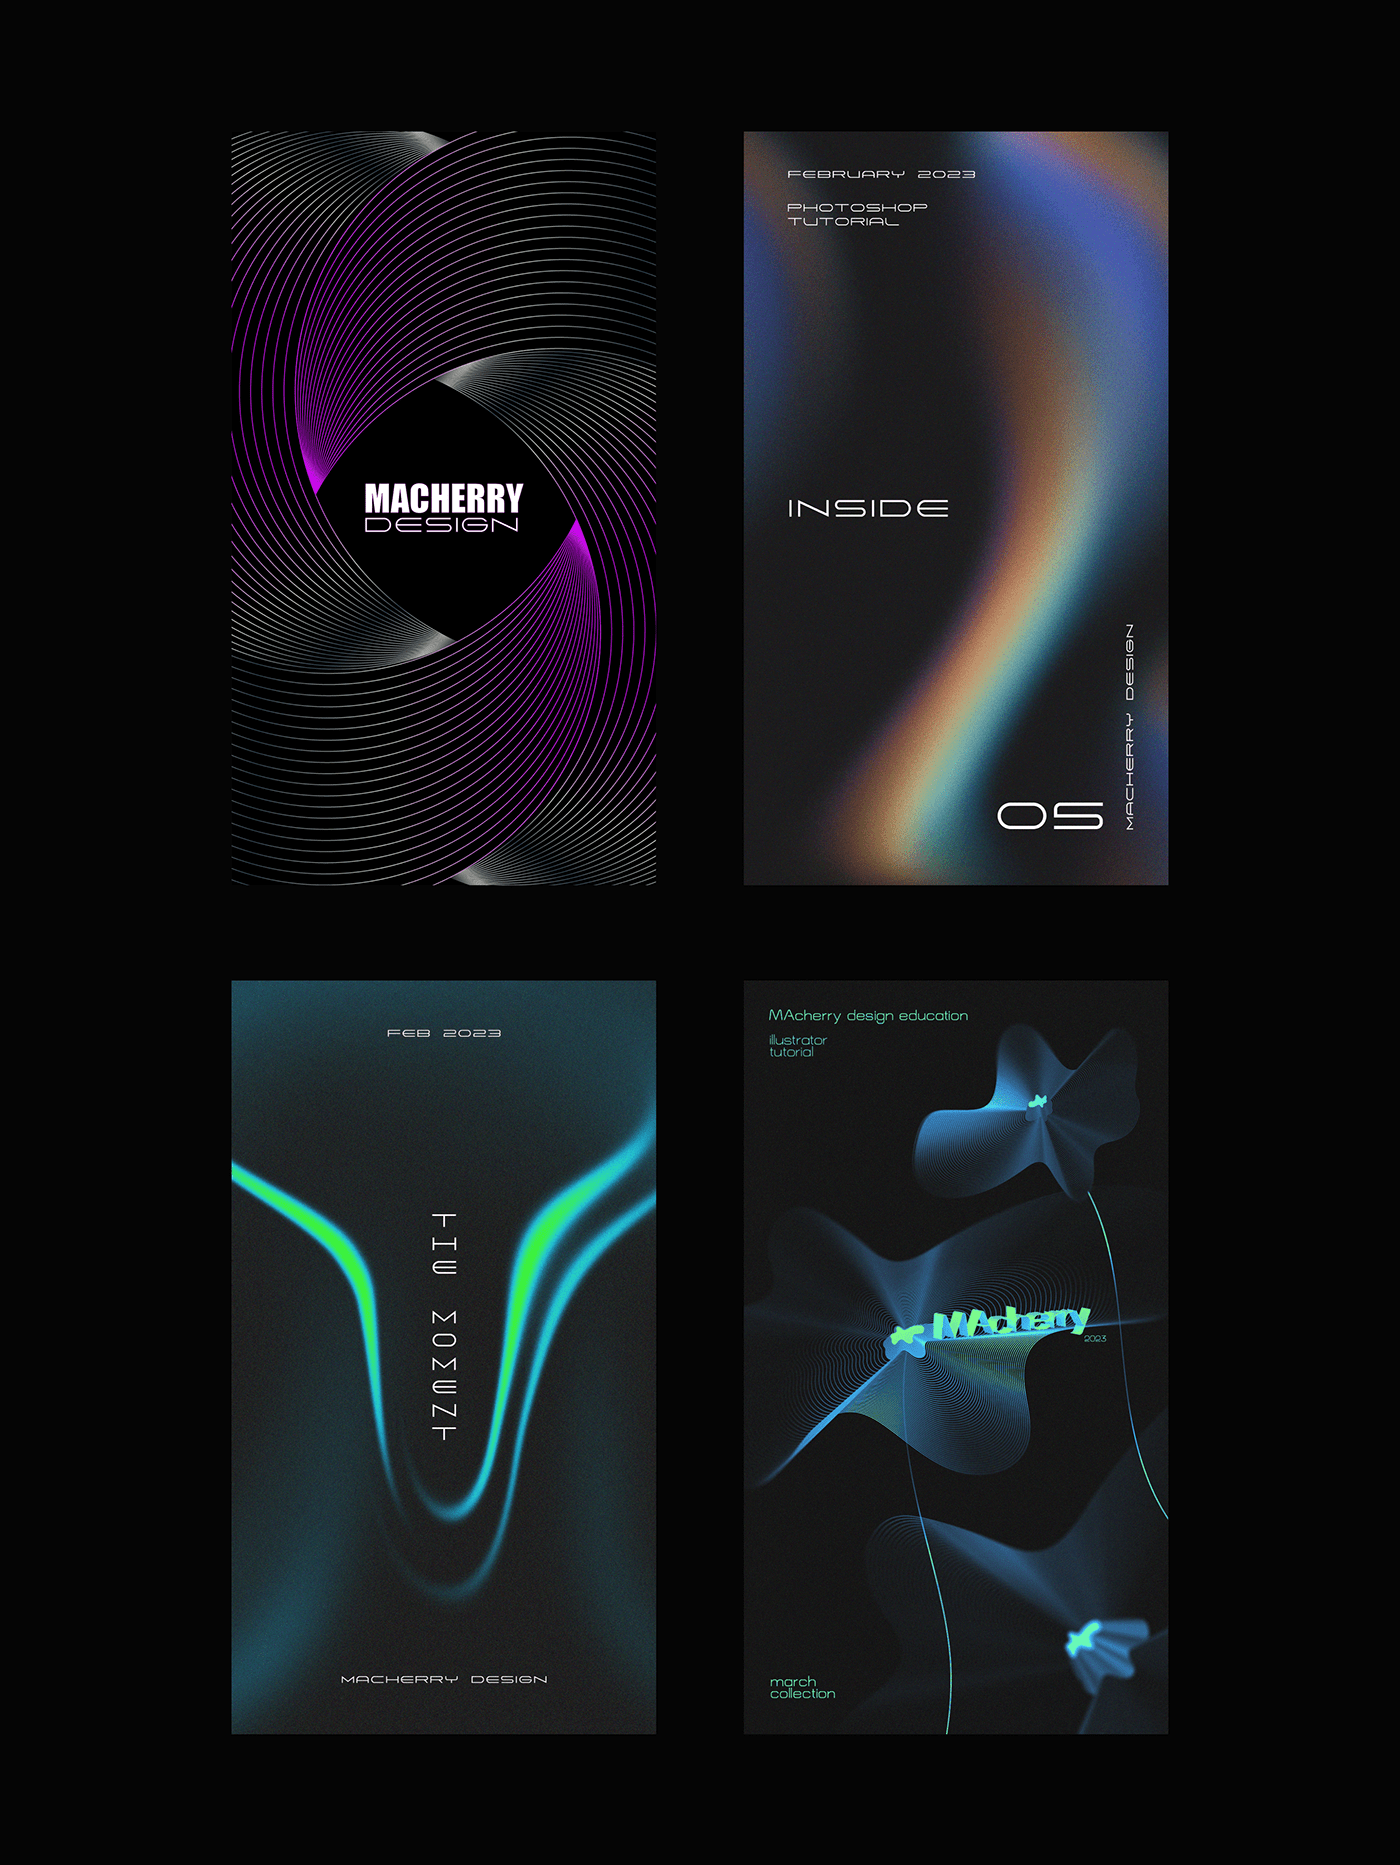 futuristic poster Poster Design flyer party flyer Flyer Design futuristic design party poster techno poster music festival poster